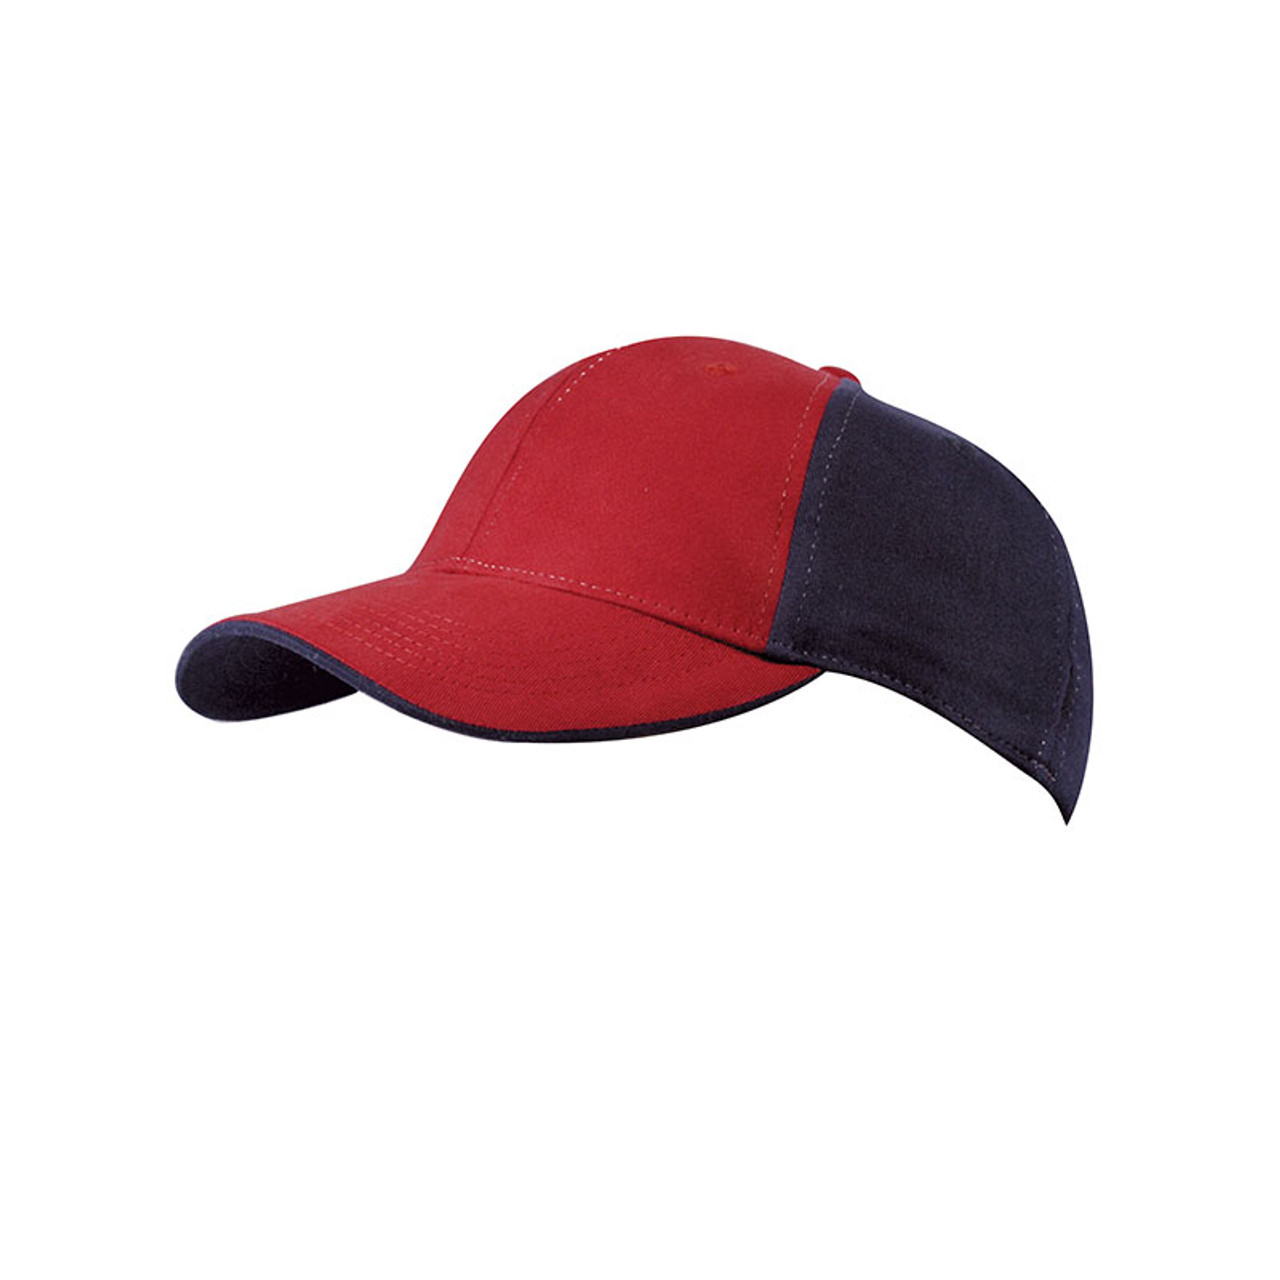 KNP CS6220 Brushed Cotton Twill Stretch Two-Tone Fitted Cap - Red/ Navy - L/XL-58cm